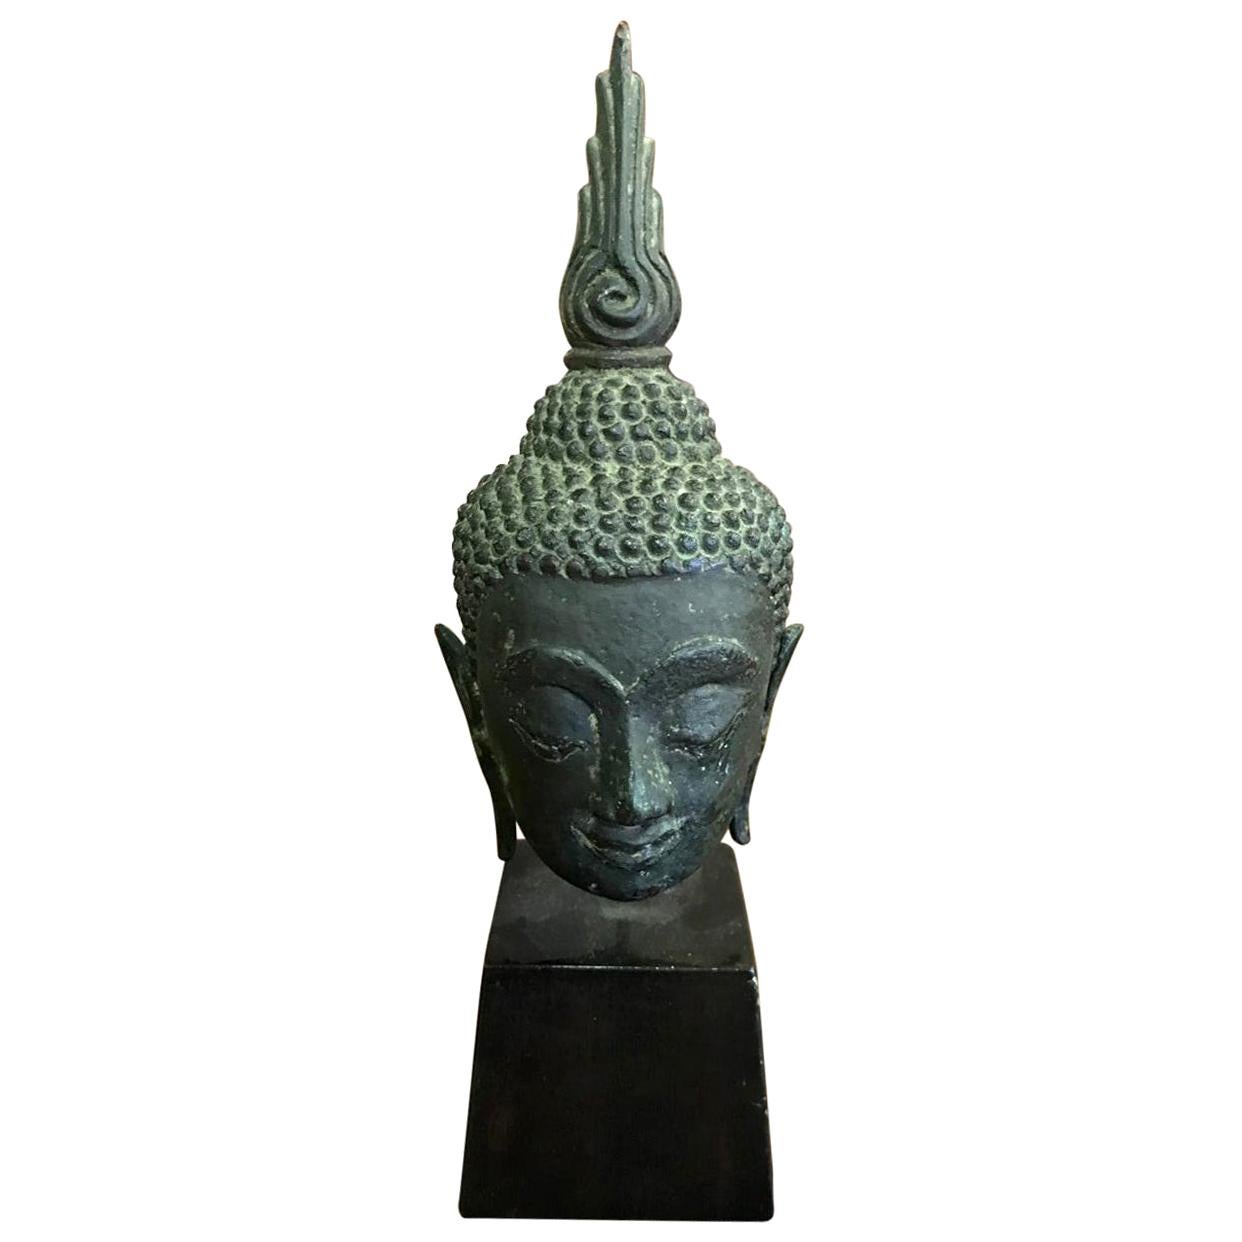 Bronze, Lacquer and Gilt Thai Temple Shrine Buddha Head on Wooden Stand